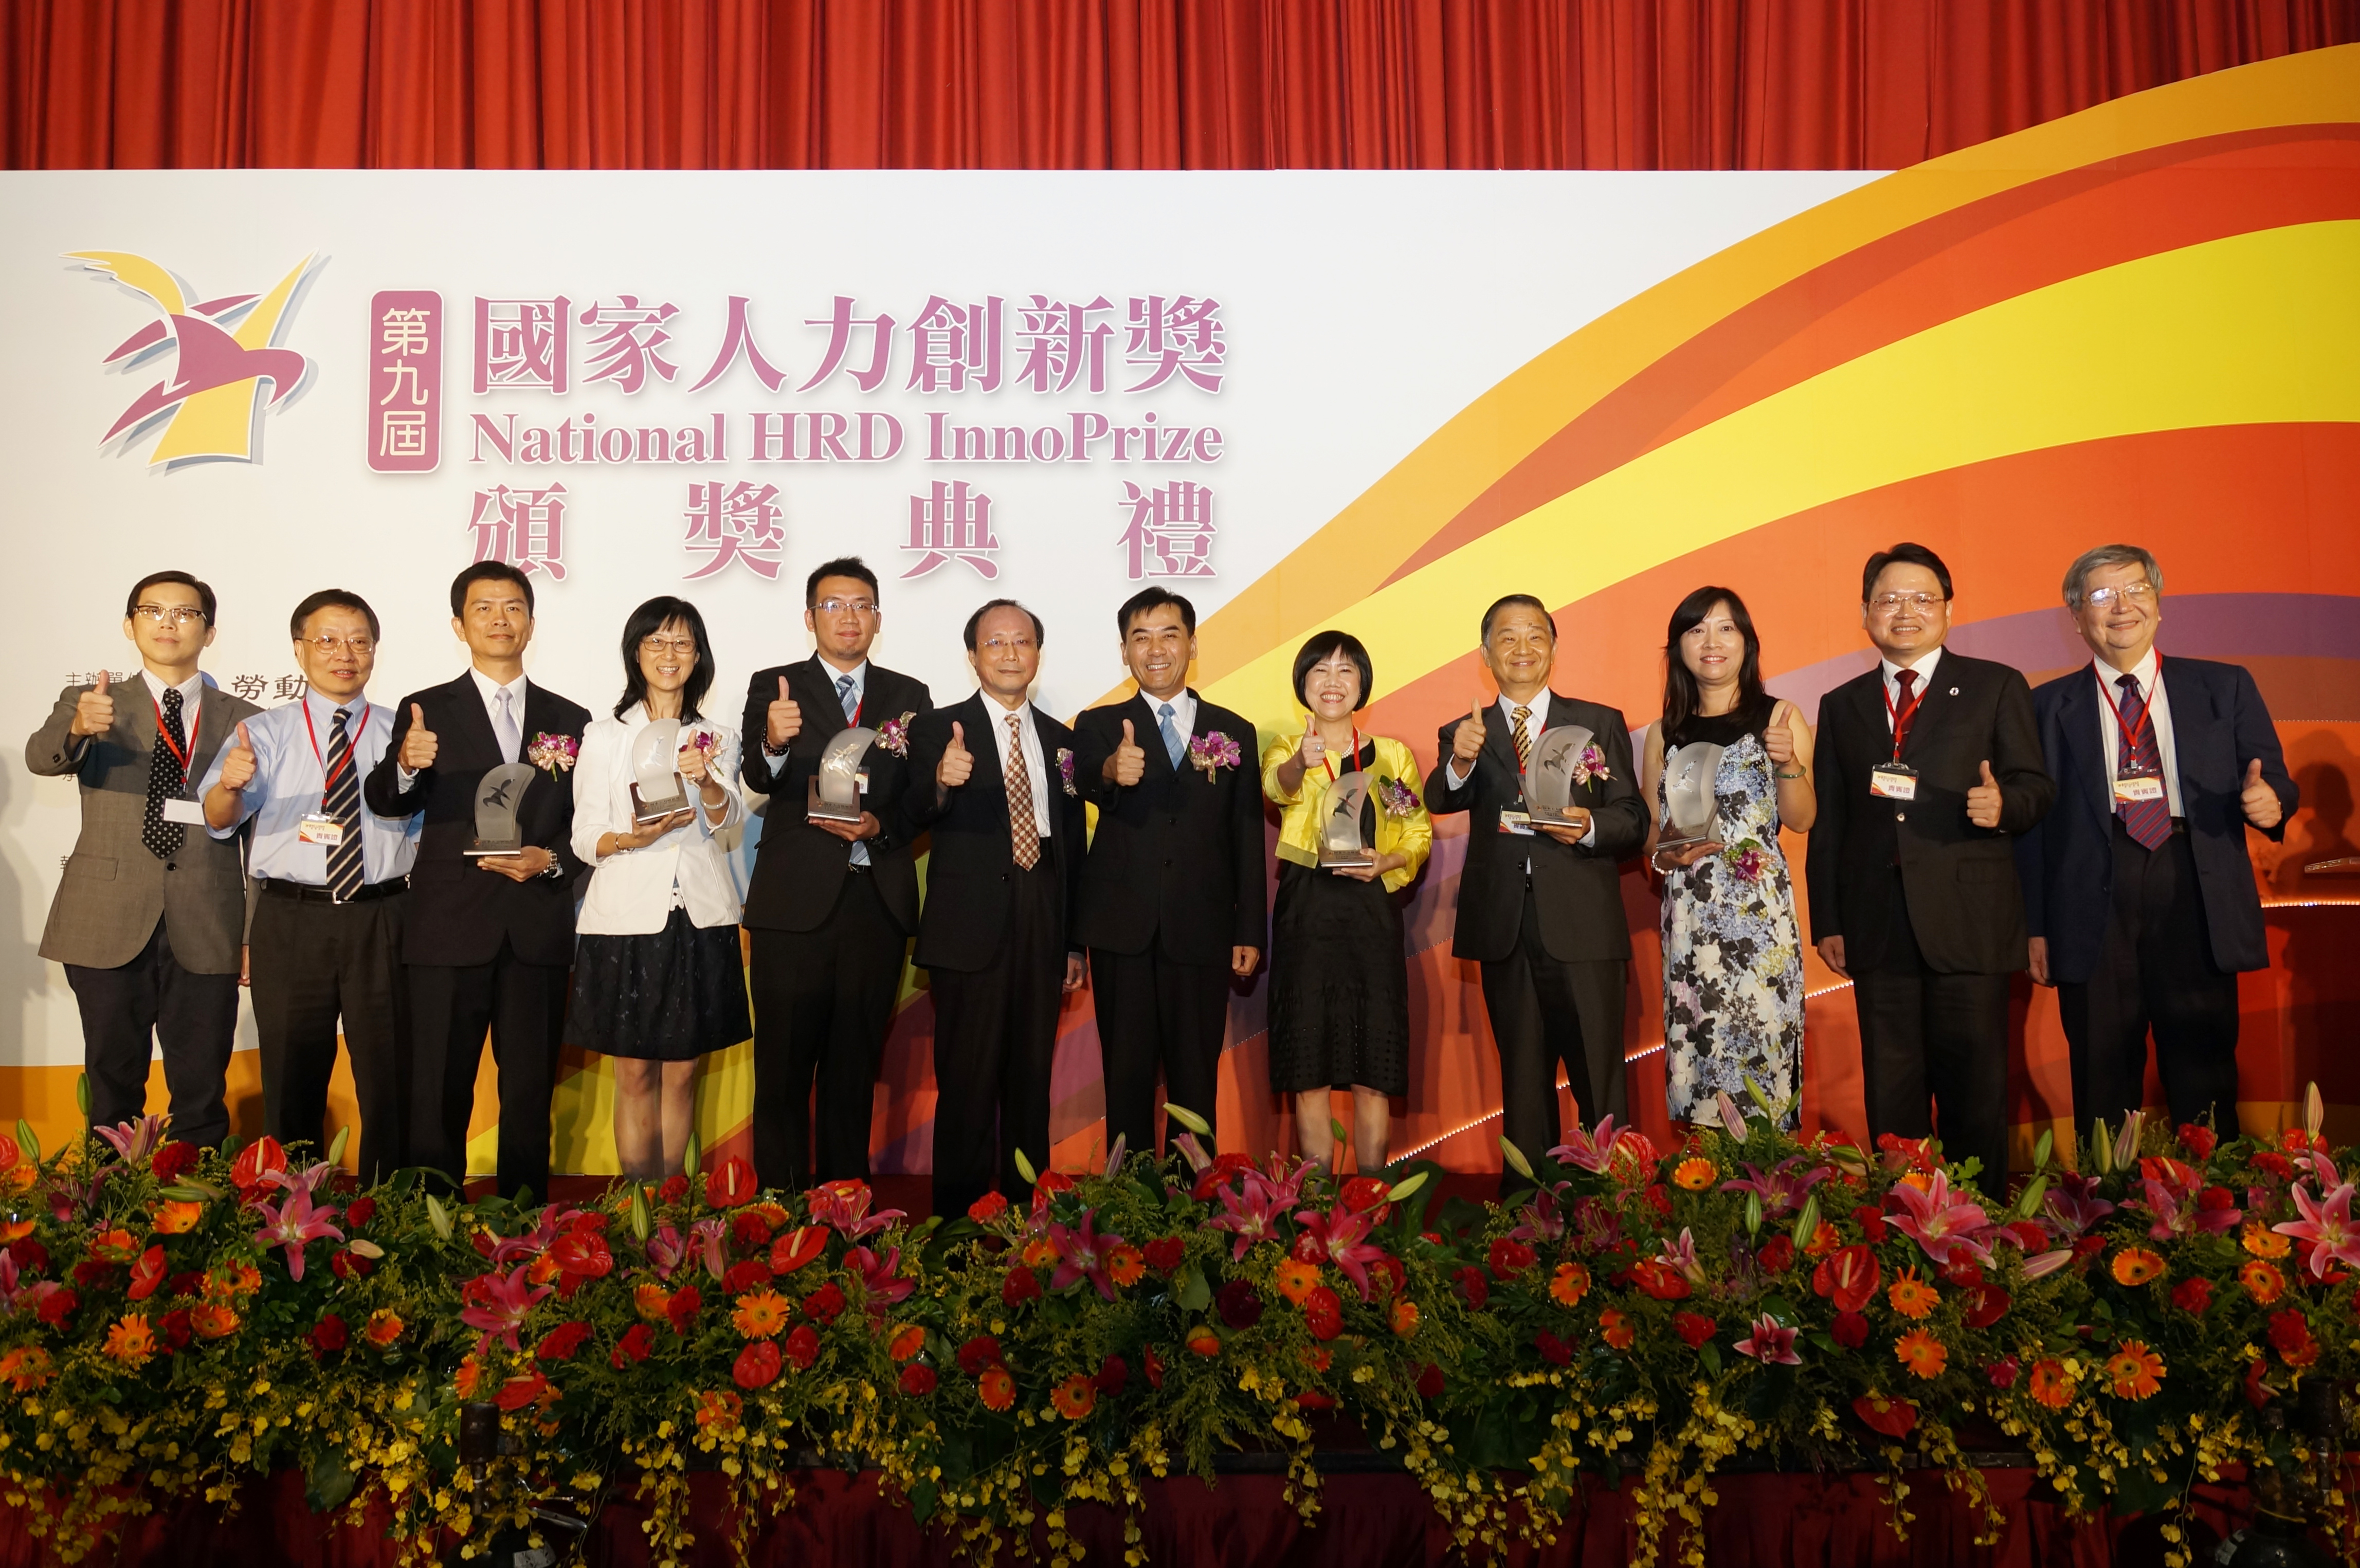 Ministry of Labor Announces 2014 9th National HRD InnoPrize Winners 展示圖